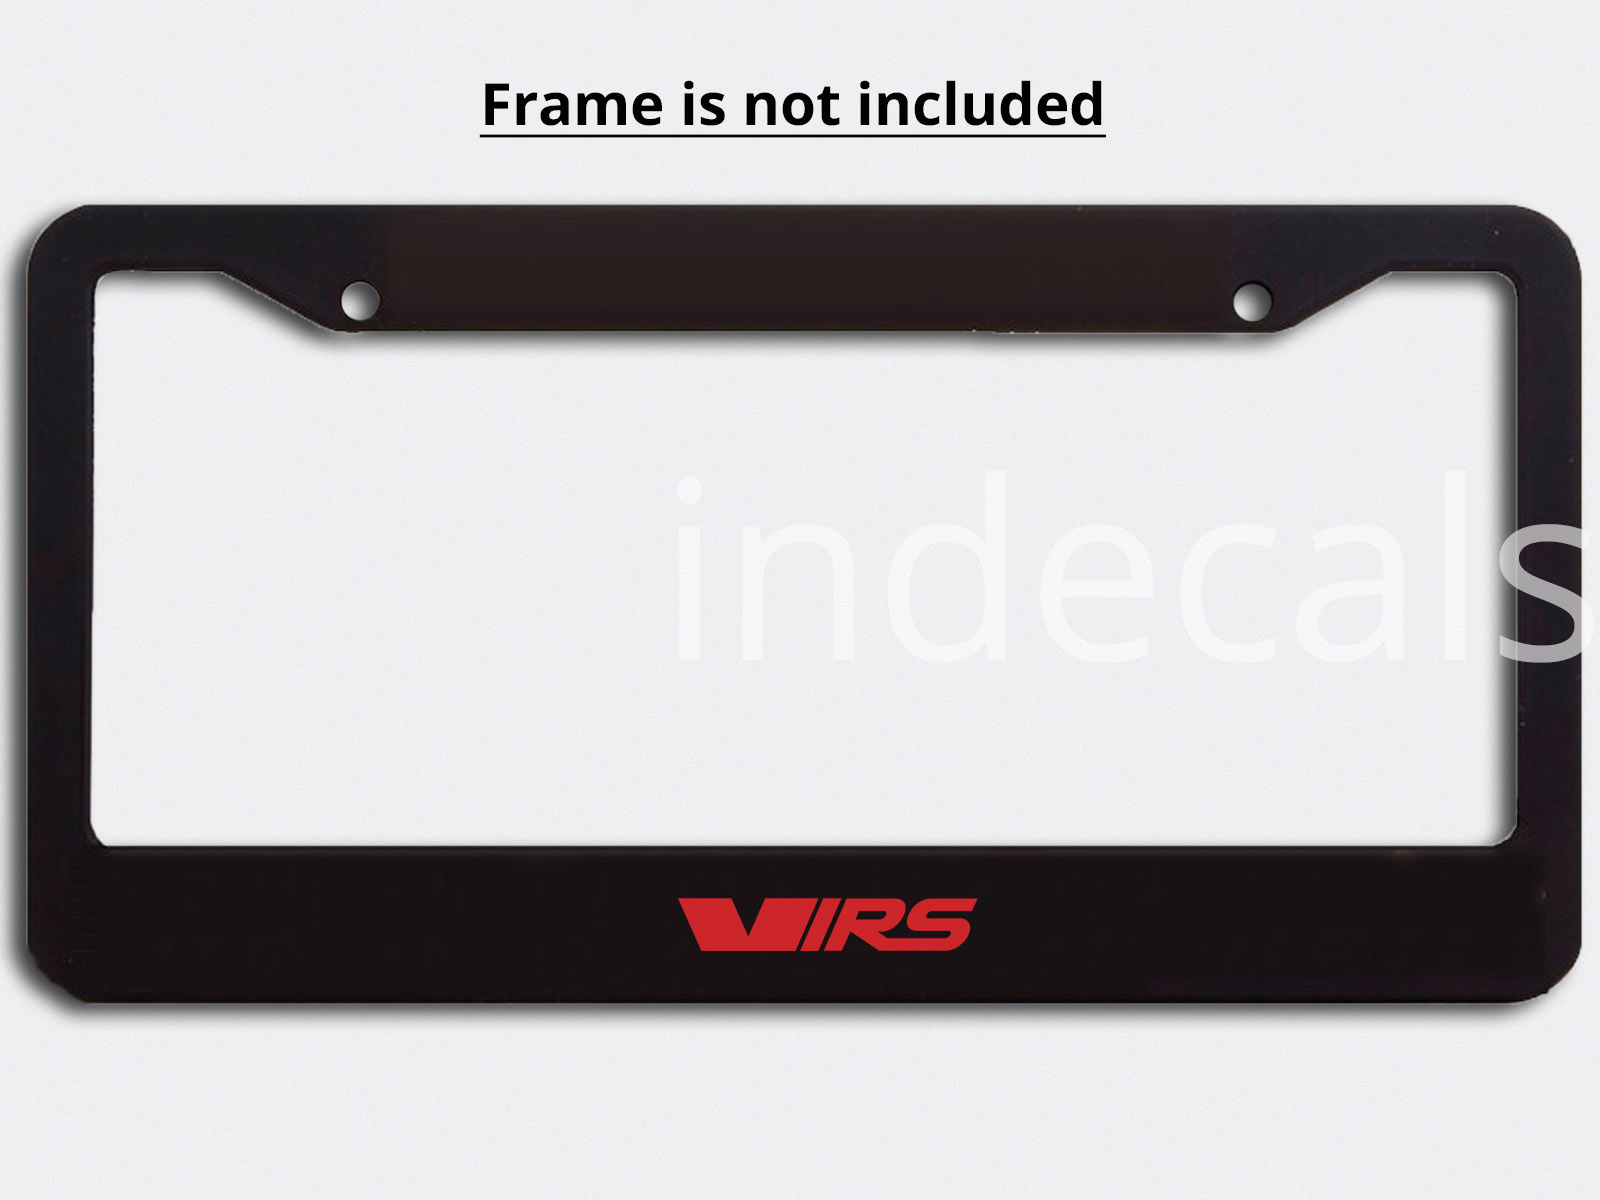 3 x Skoda RS Stickers for License Plate Frame - Red